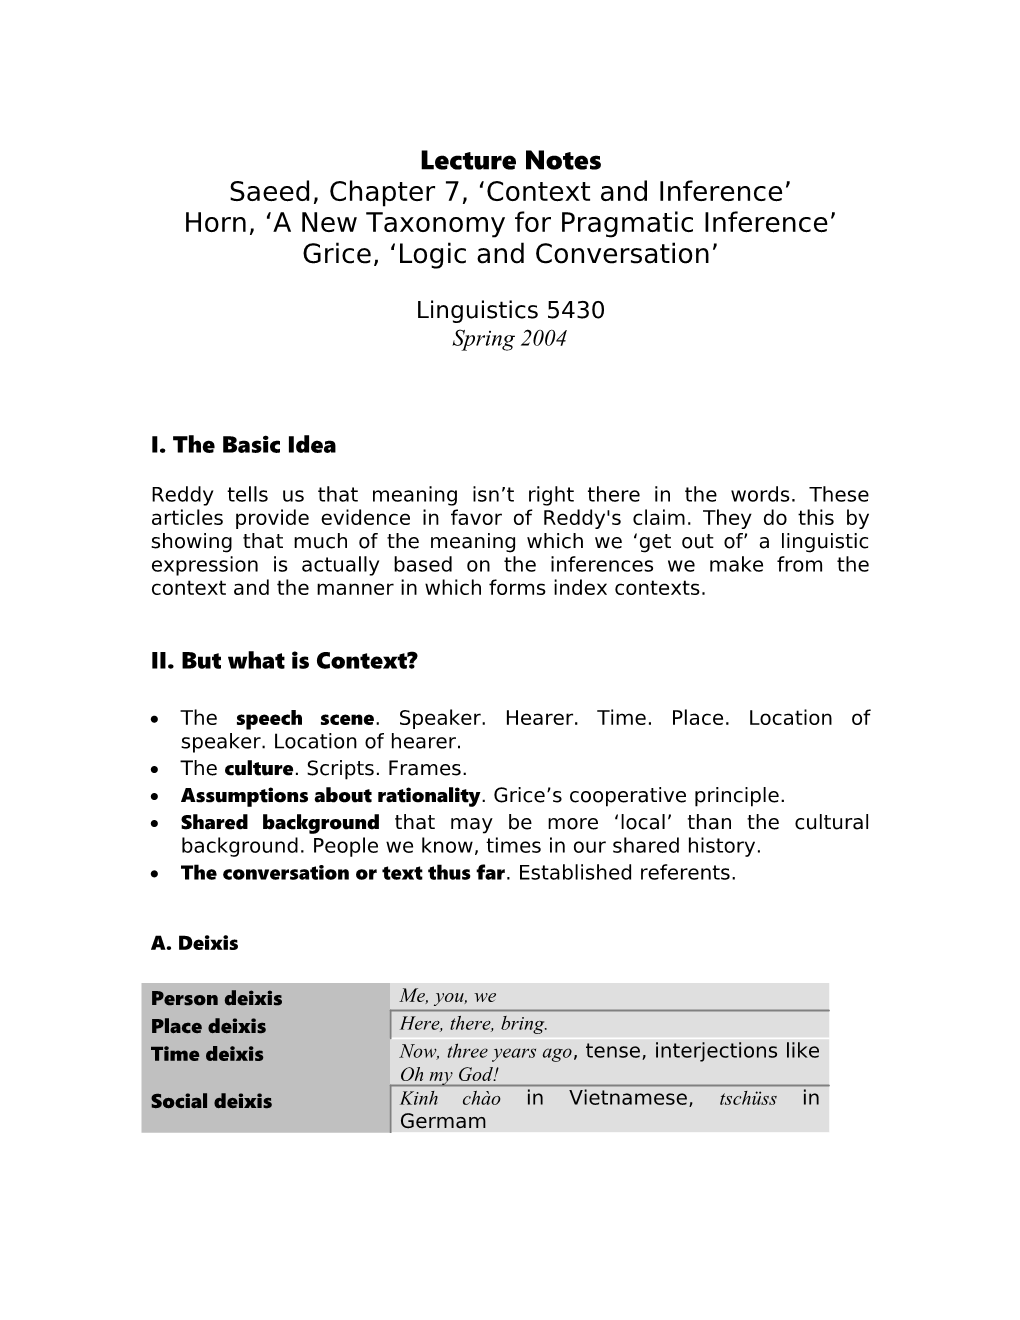 Saeed, Chapter 7, Context and Inference